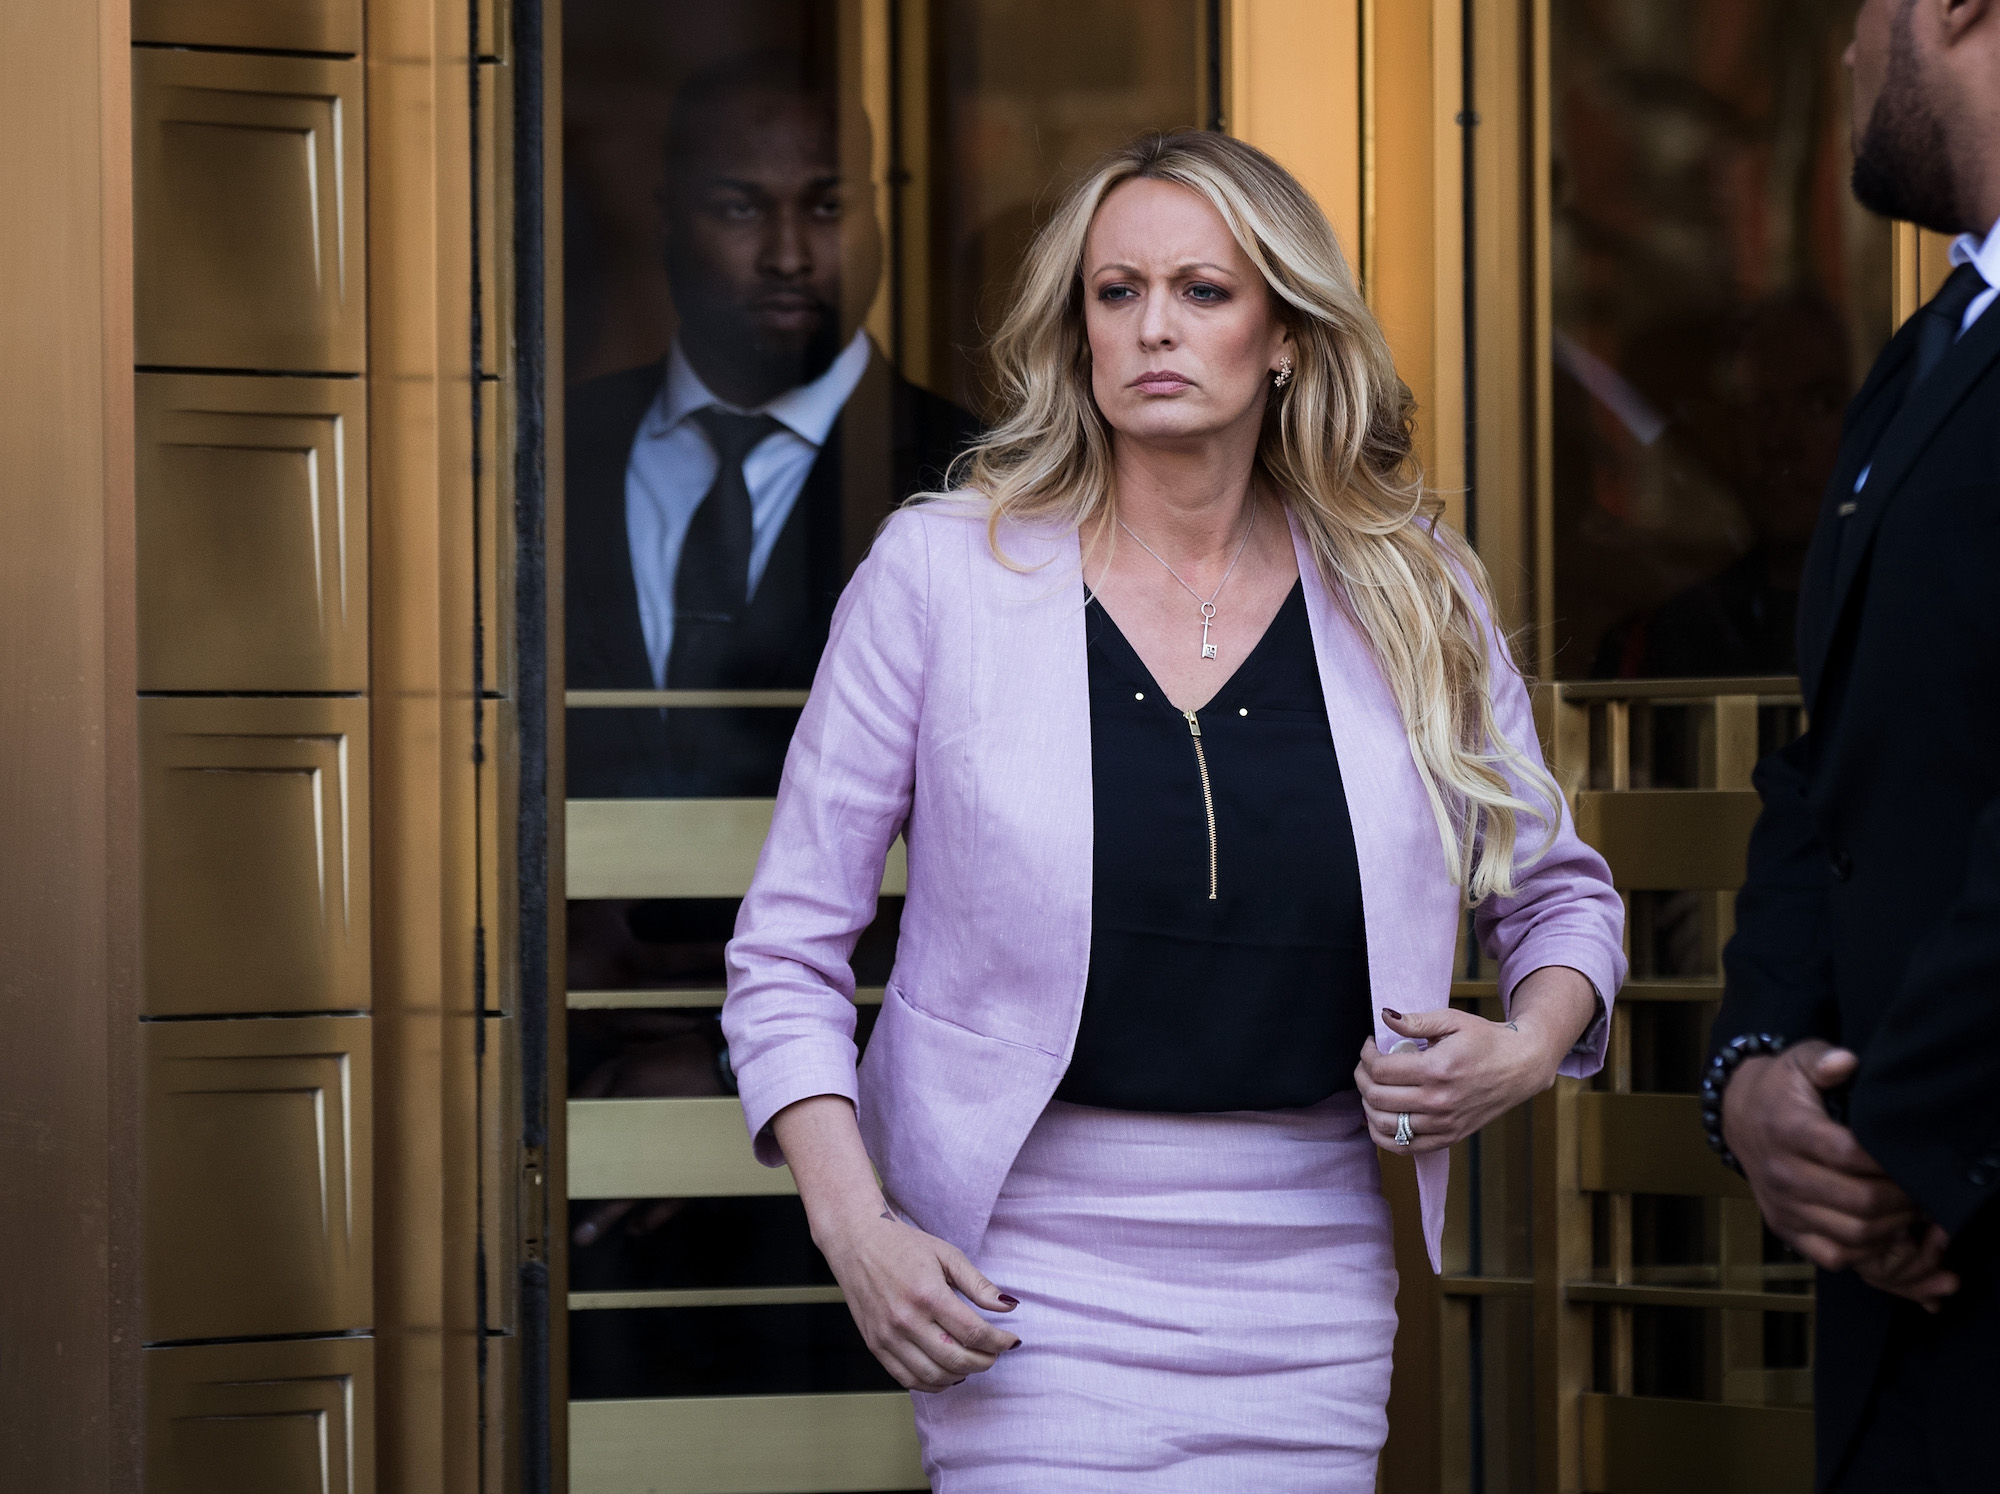 Stormy Daniels exits the a federal court in New York City on April 16, 2018.